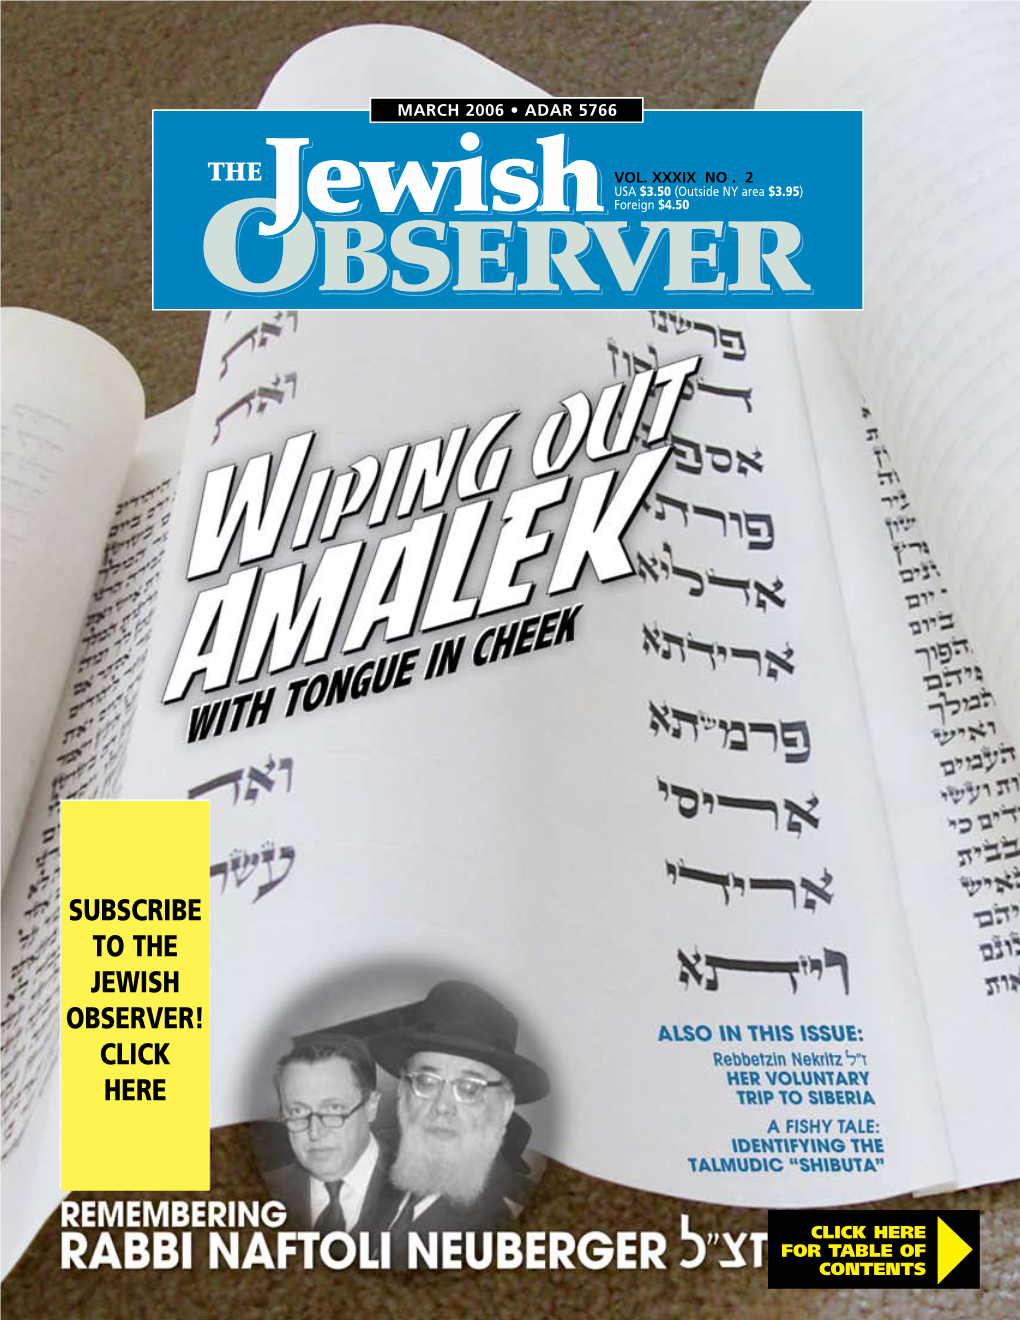 Subscribe to the Jewish Observer! Click Here